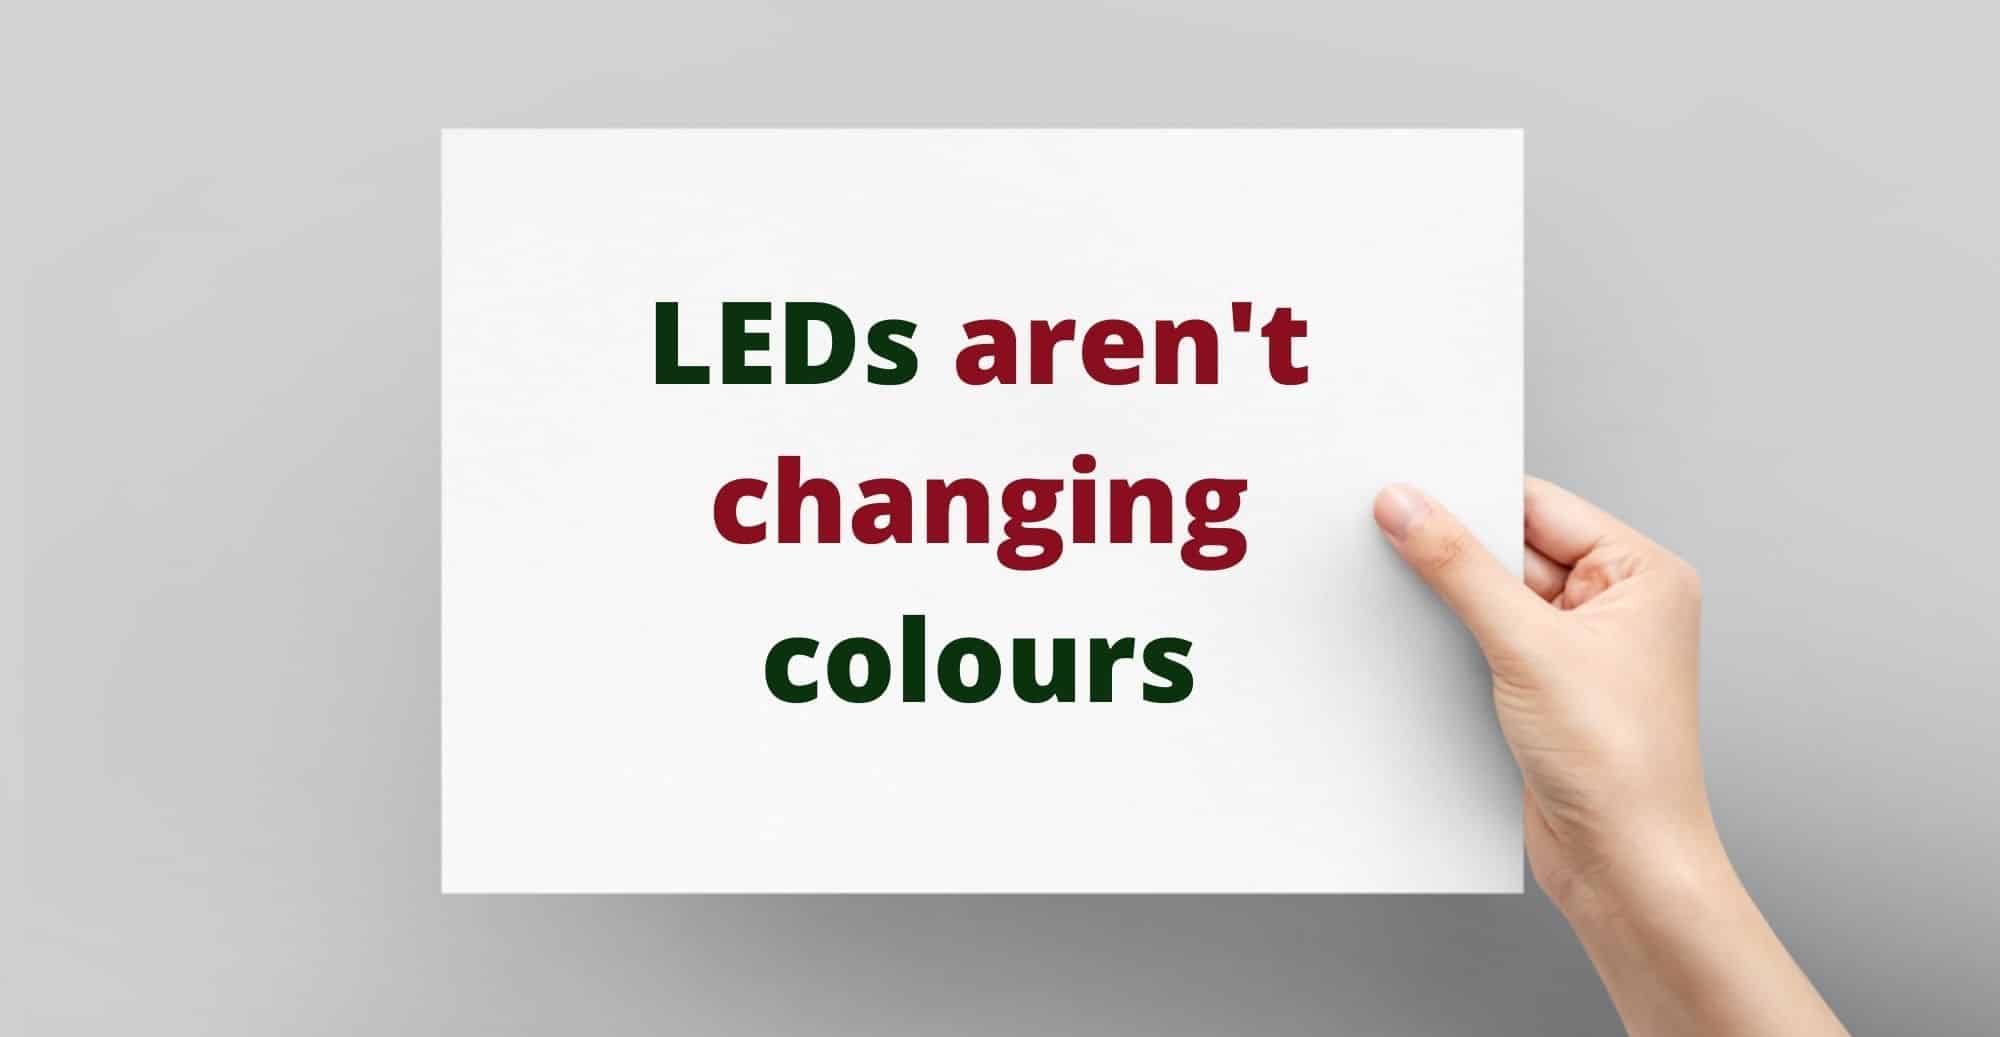 LEDs arent changing colours